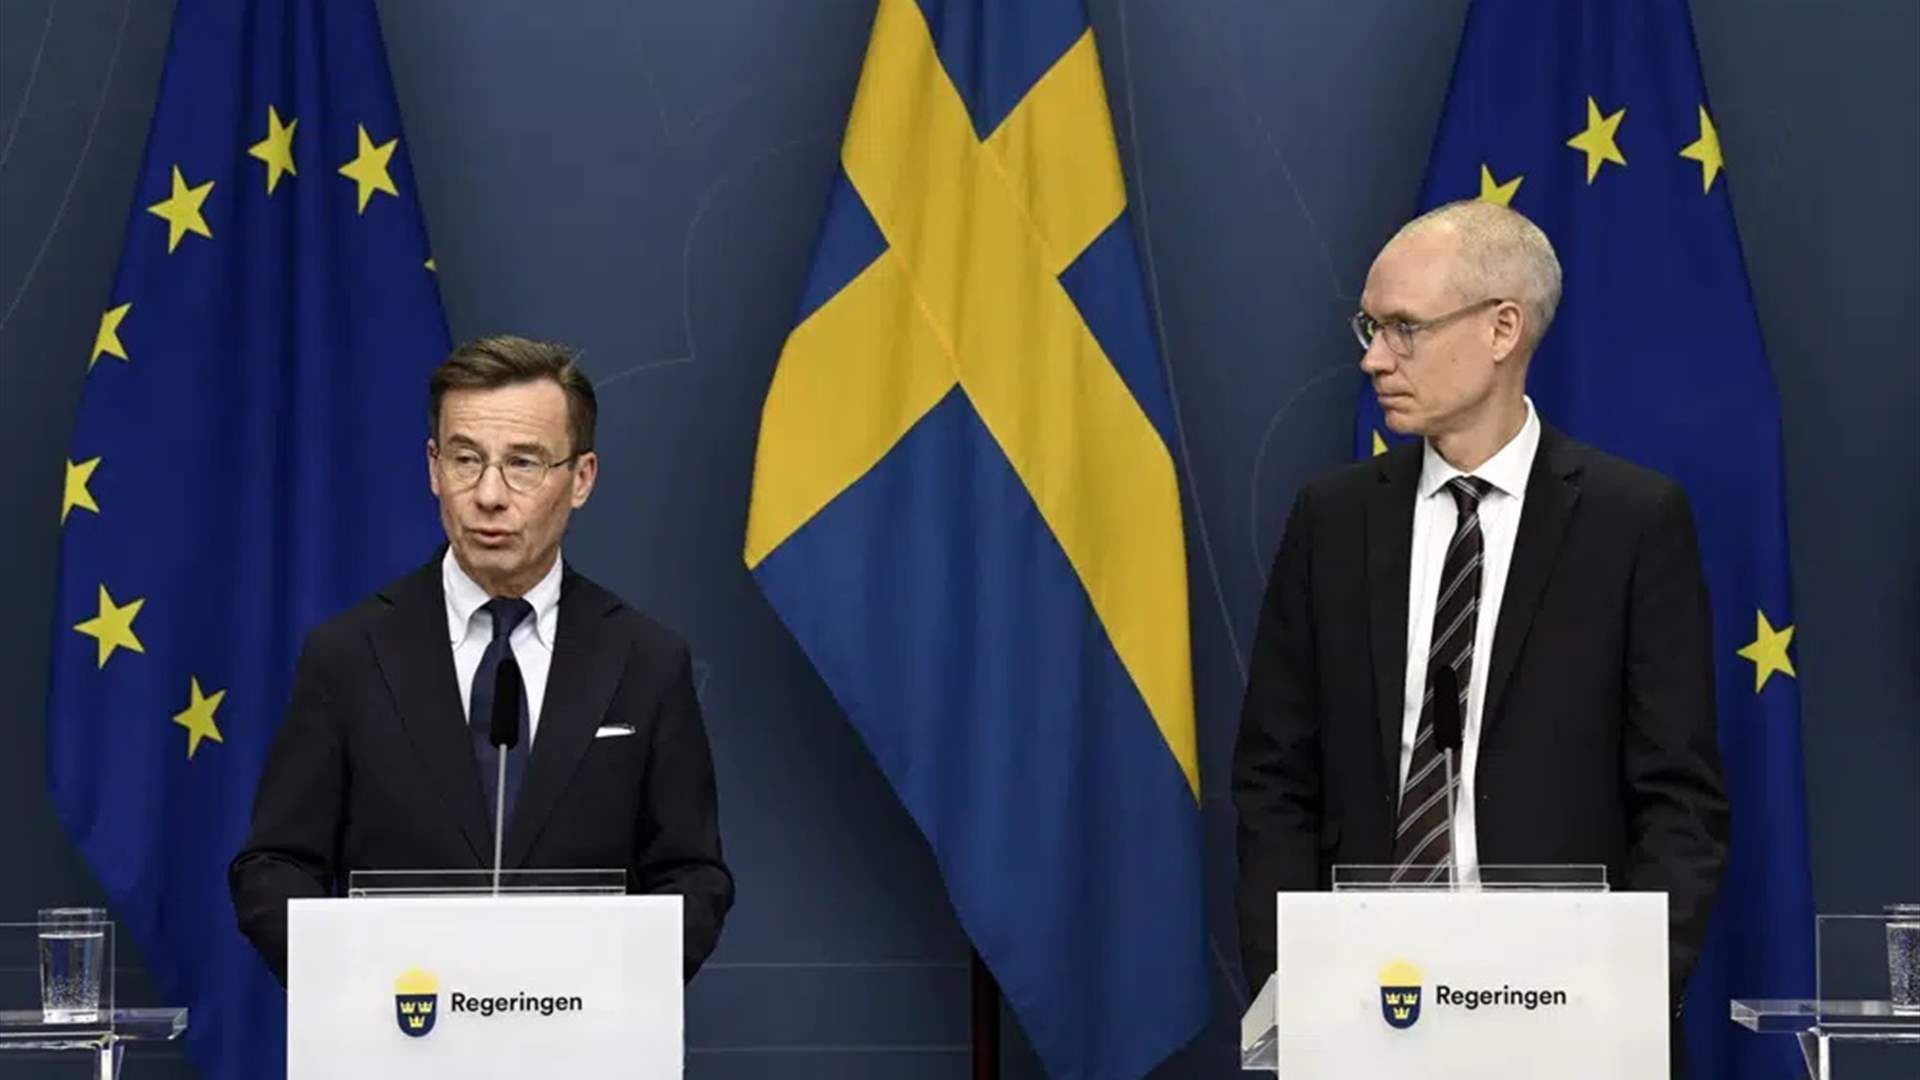 Swedish leader: Finland likely to join NATO before Sweden 